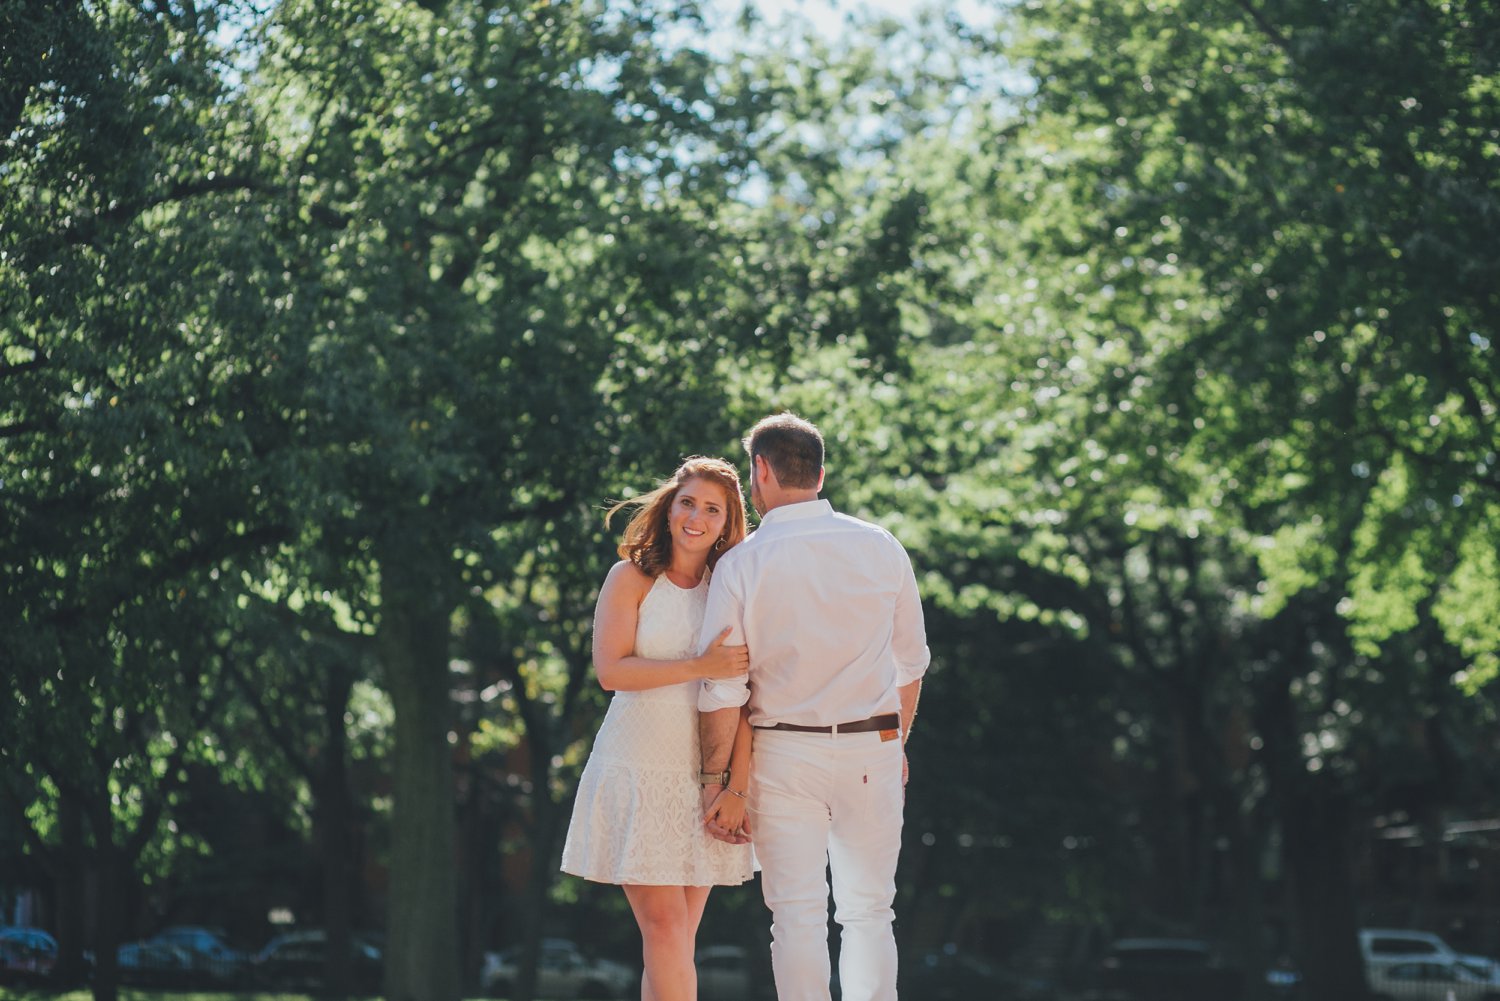 32NYC-NJ-ENGAGEMENT-PHOTOGRAPHY-BY-INTOTHESTORY-MOO-JAE.JPG